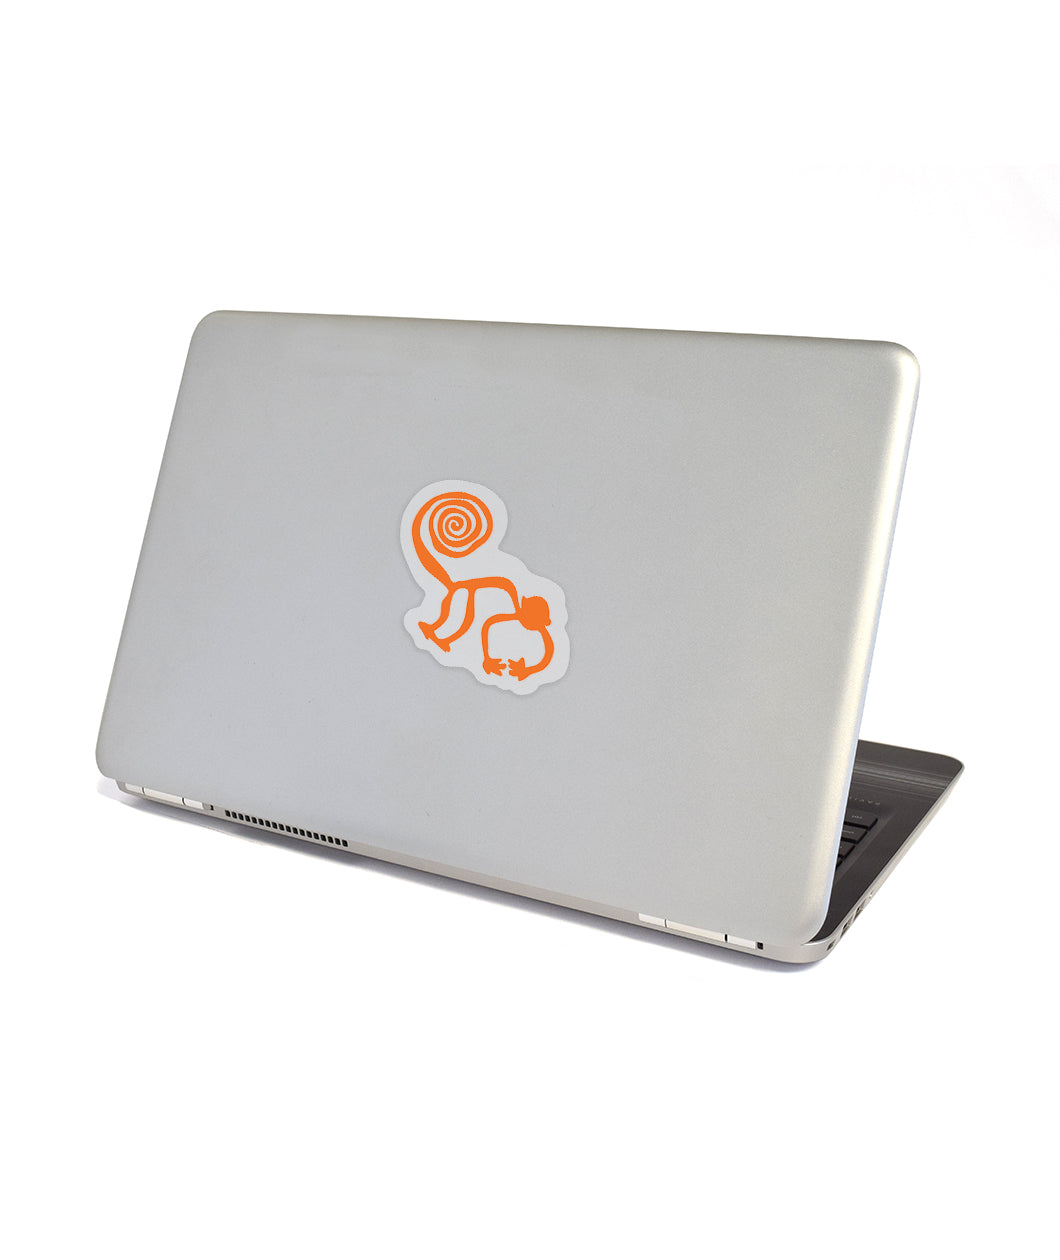 Gray computer half closed with sticker of orange silhouette cartoon drawing of monkey with a tail that spirals inwards. Monkey is on transparent background - from Animal Wonders